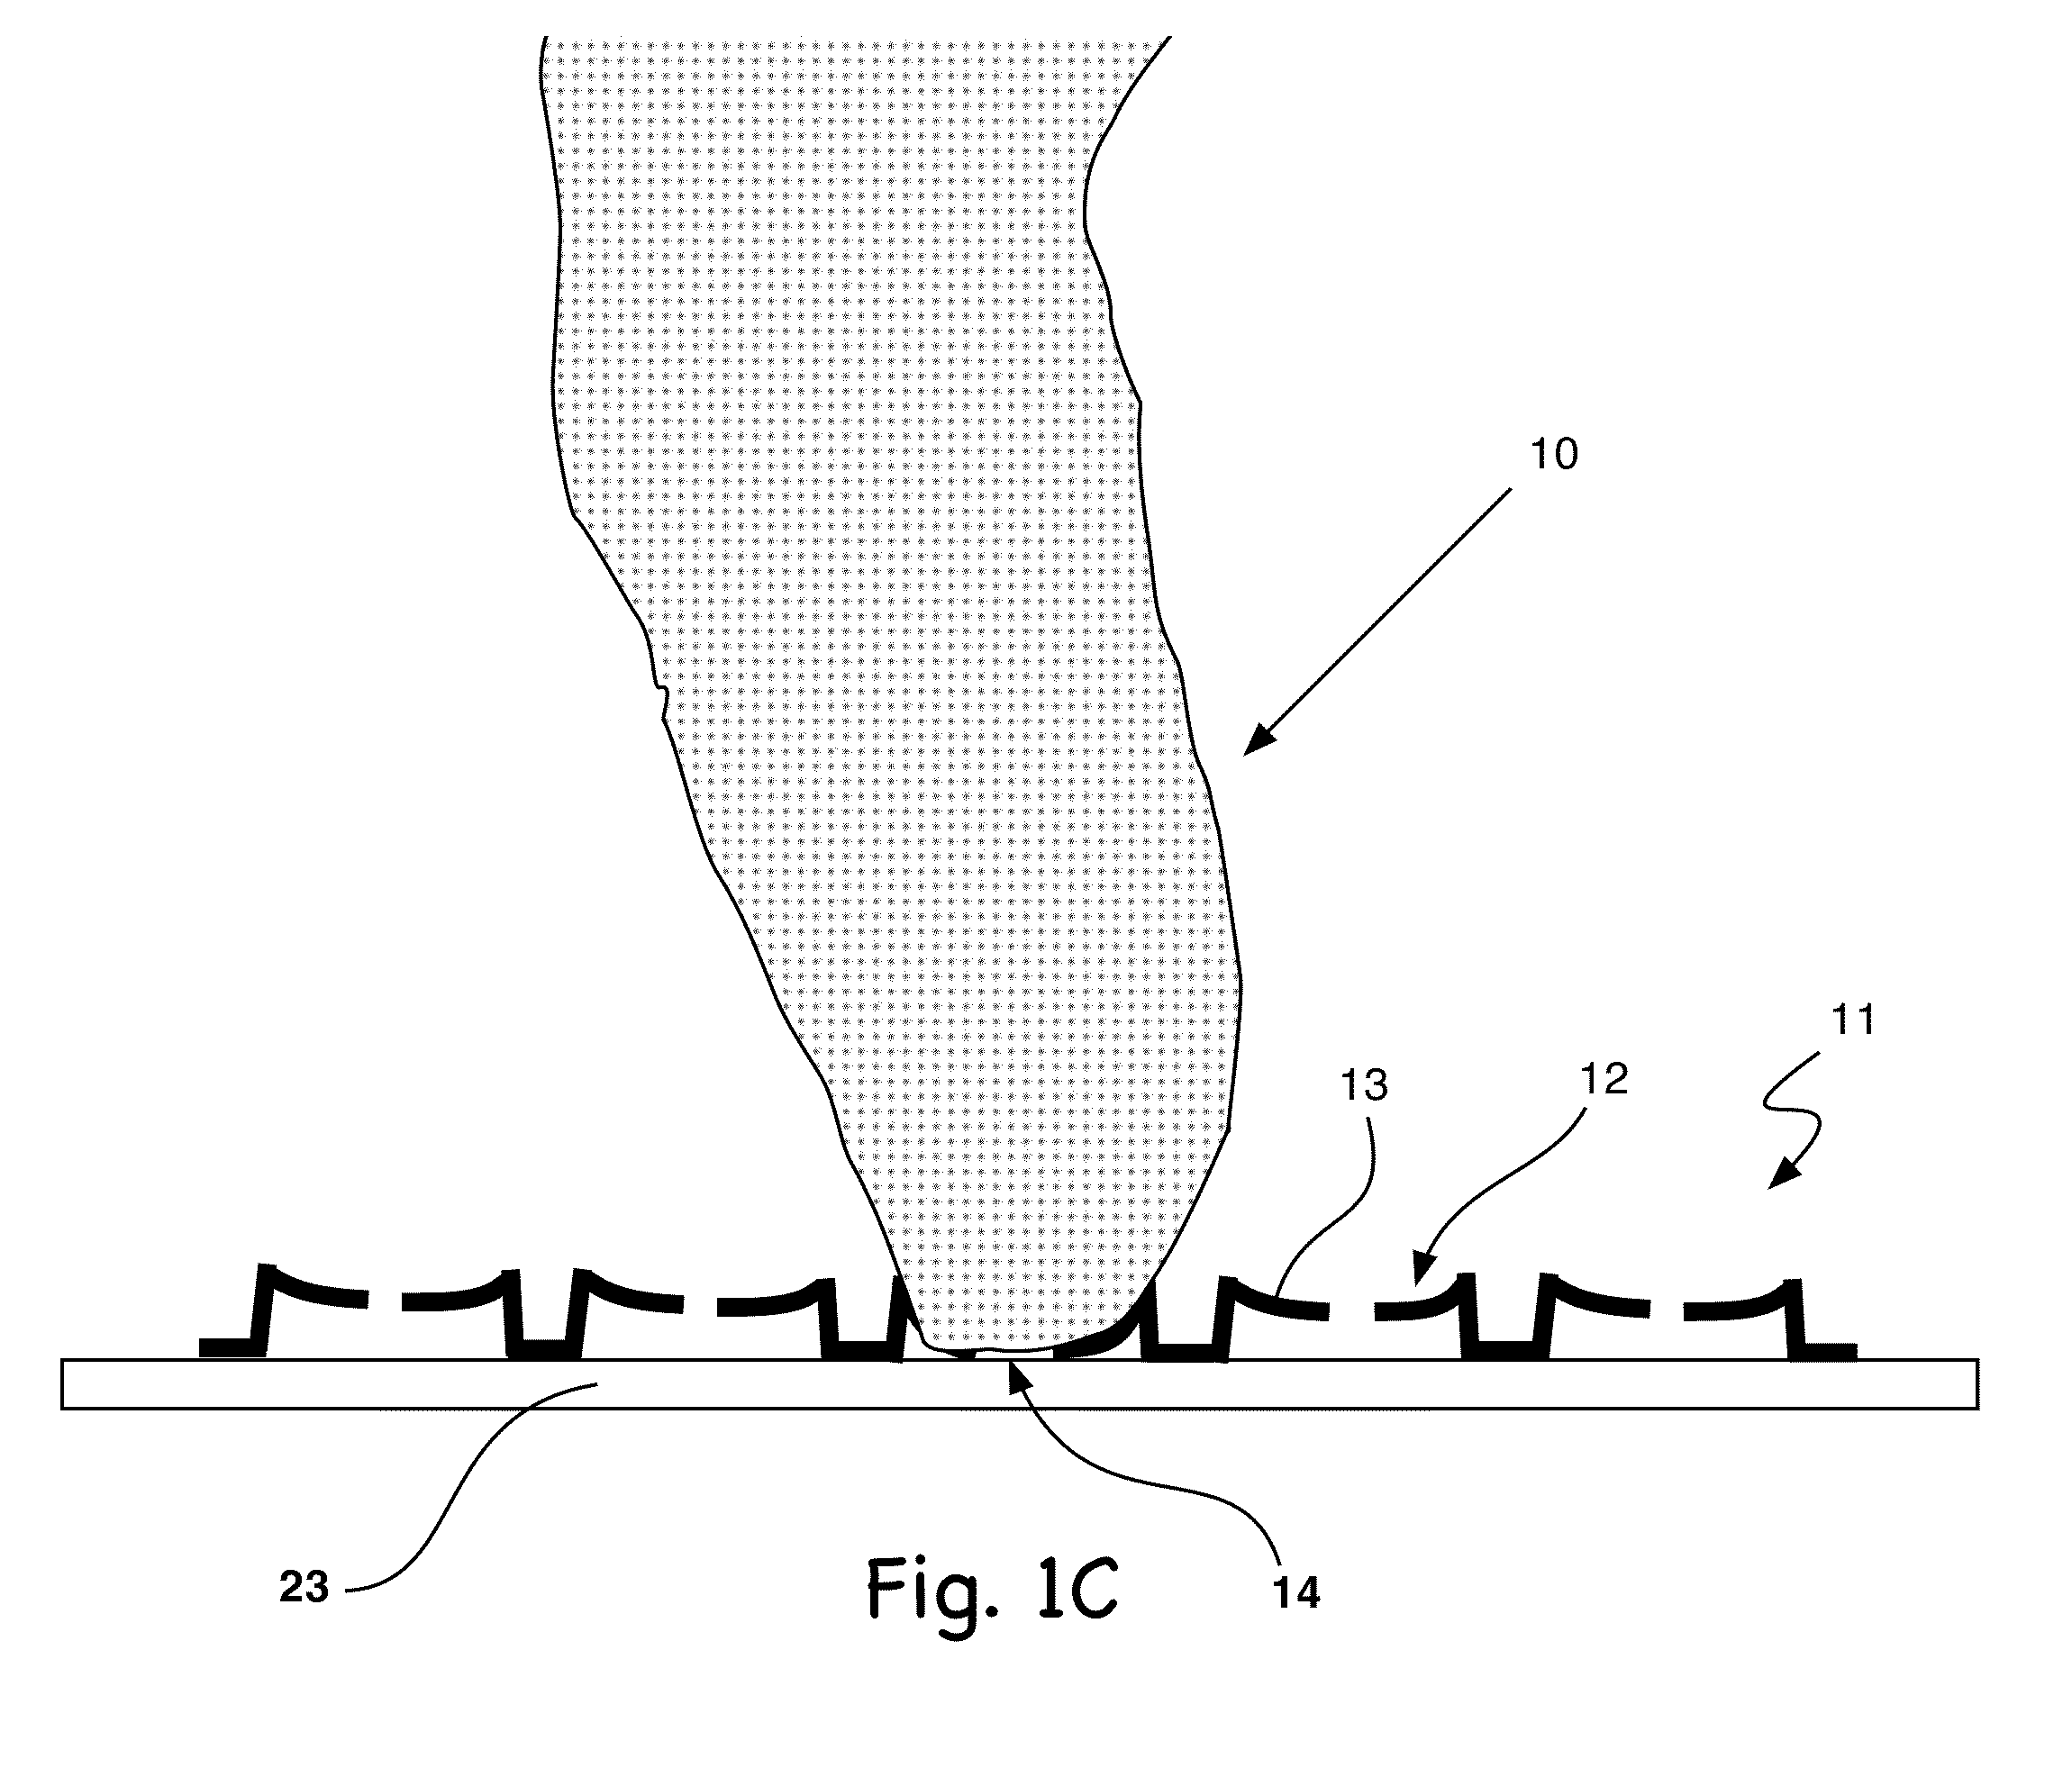 Keyboards for touch-operated devices with capacitive displays